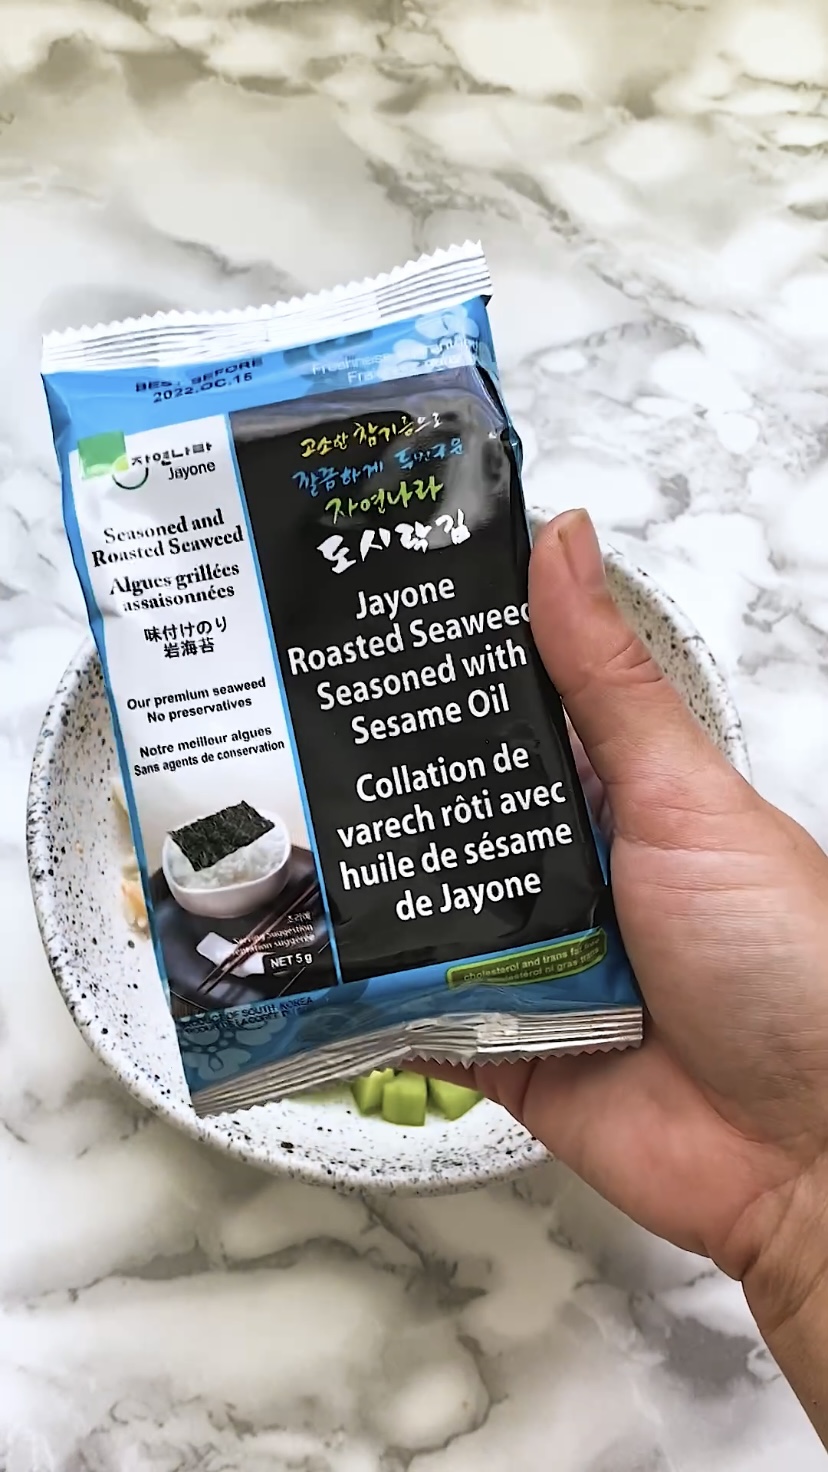 A package of nori snack sheets.